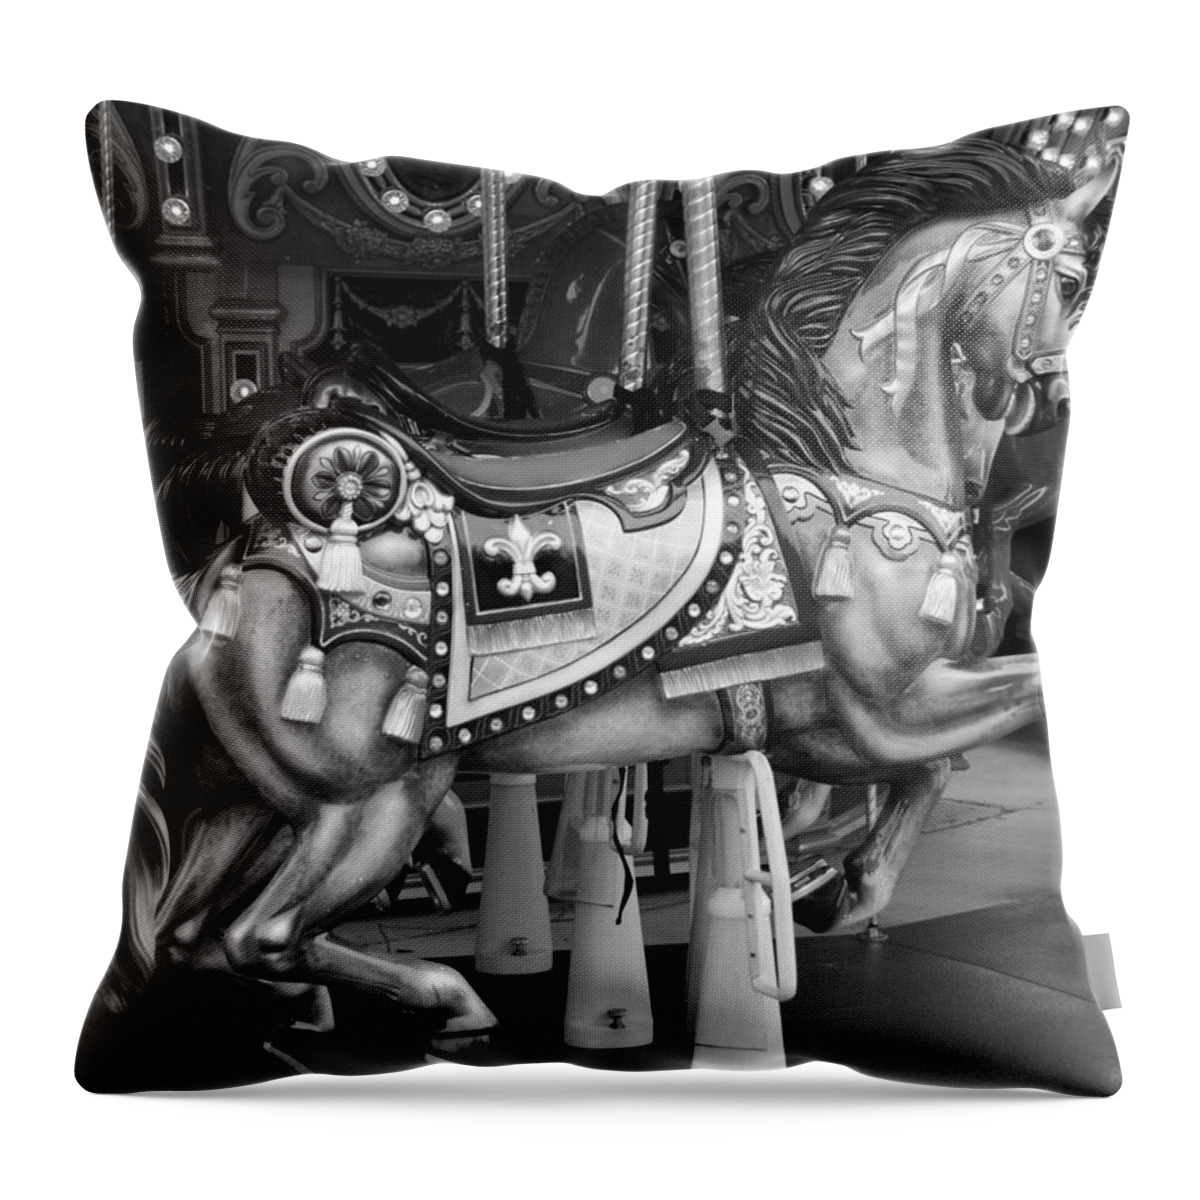 Carousel Throw Pillow featuring the photograph CAROUSEL HORSE in BLACK AND WHITE 2 by Rob Hans